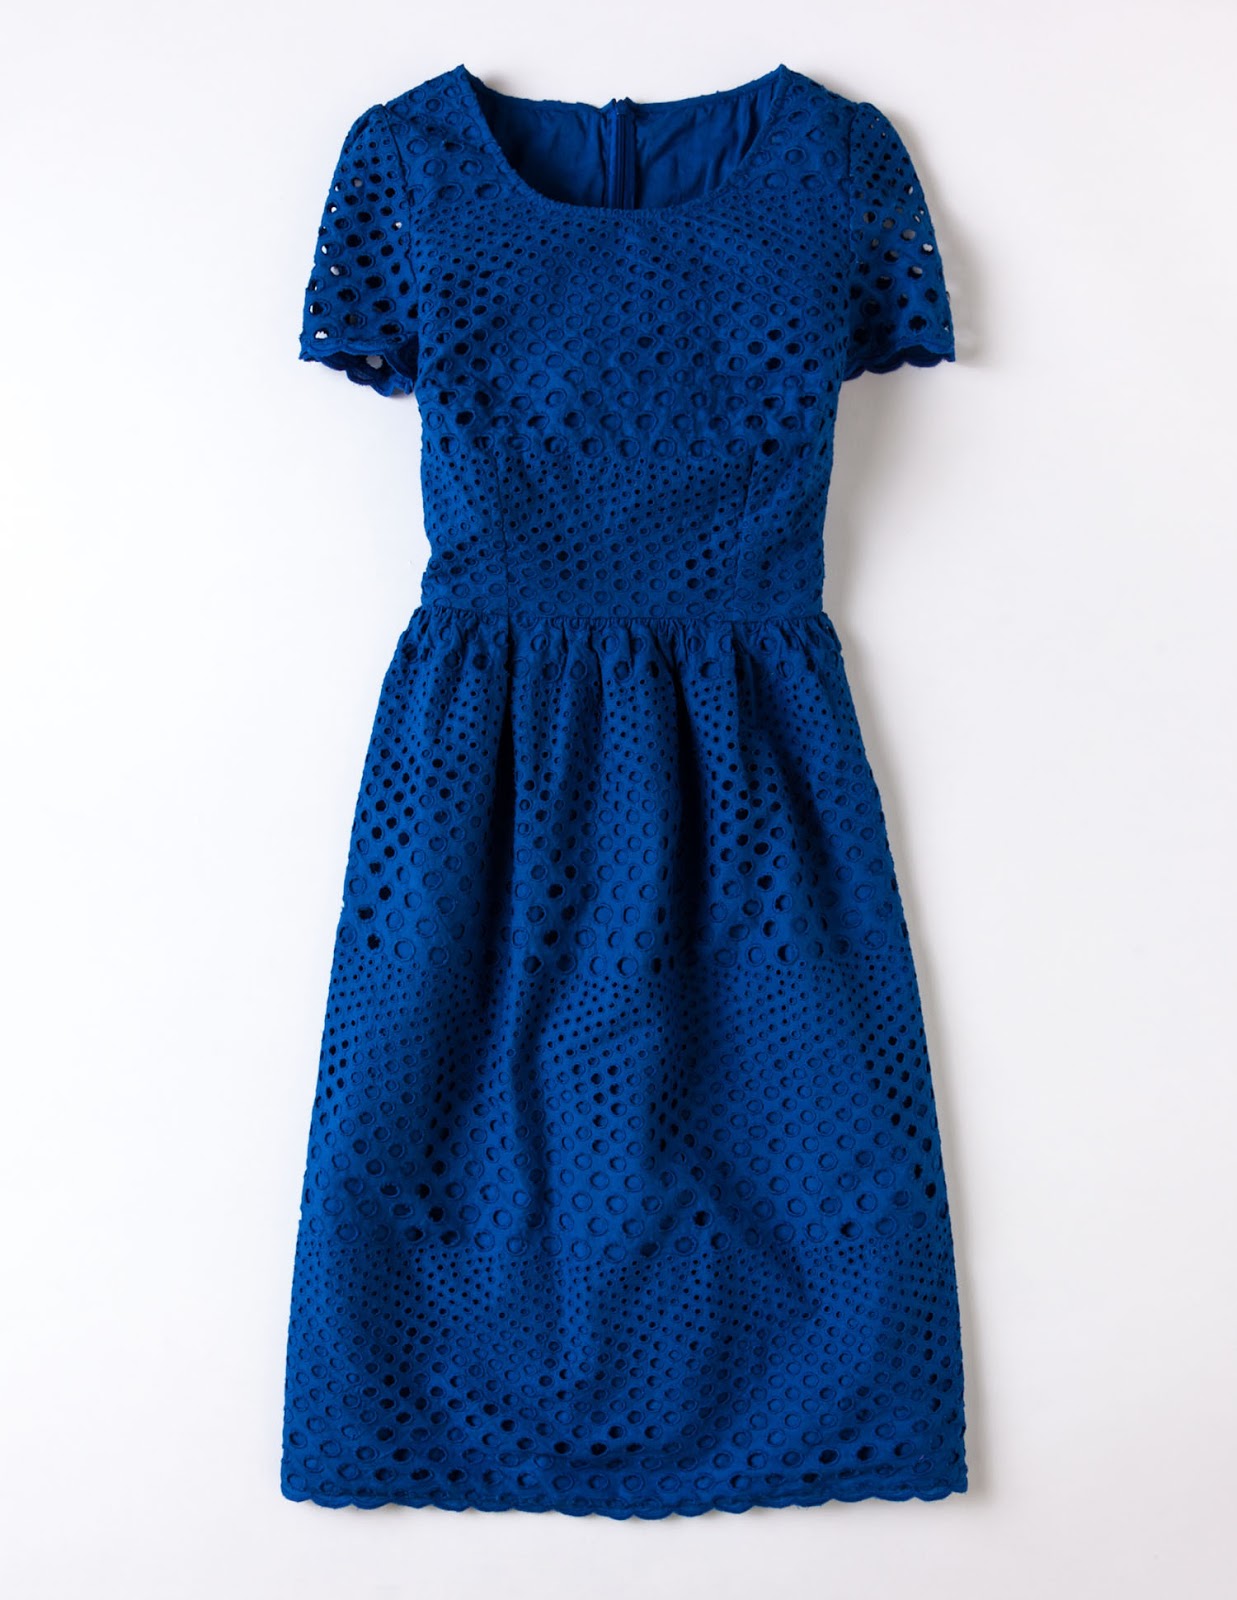 Breakfast at Anthropologie: Boden Spring 2014 Preview + 20% OFF